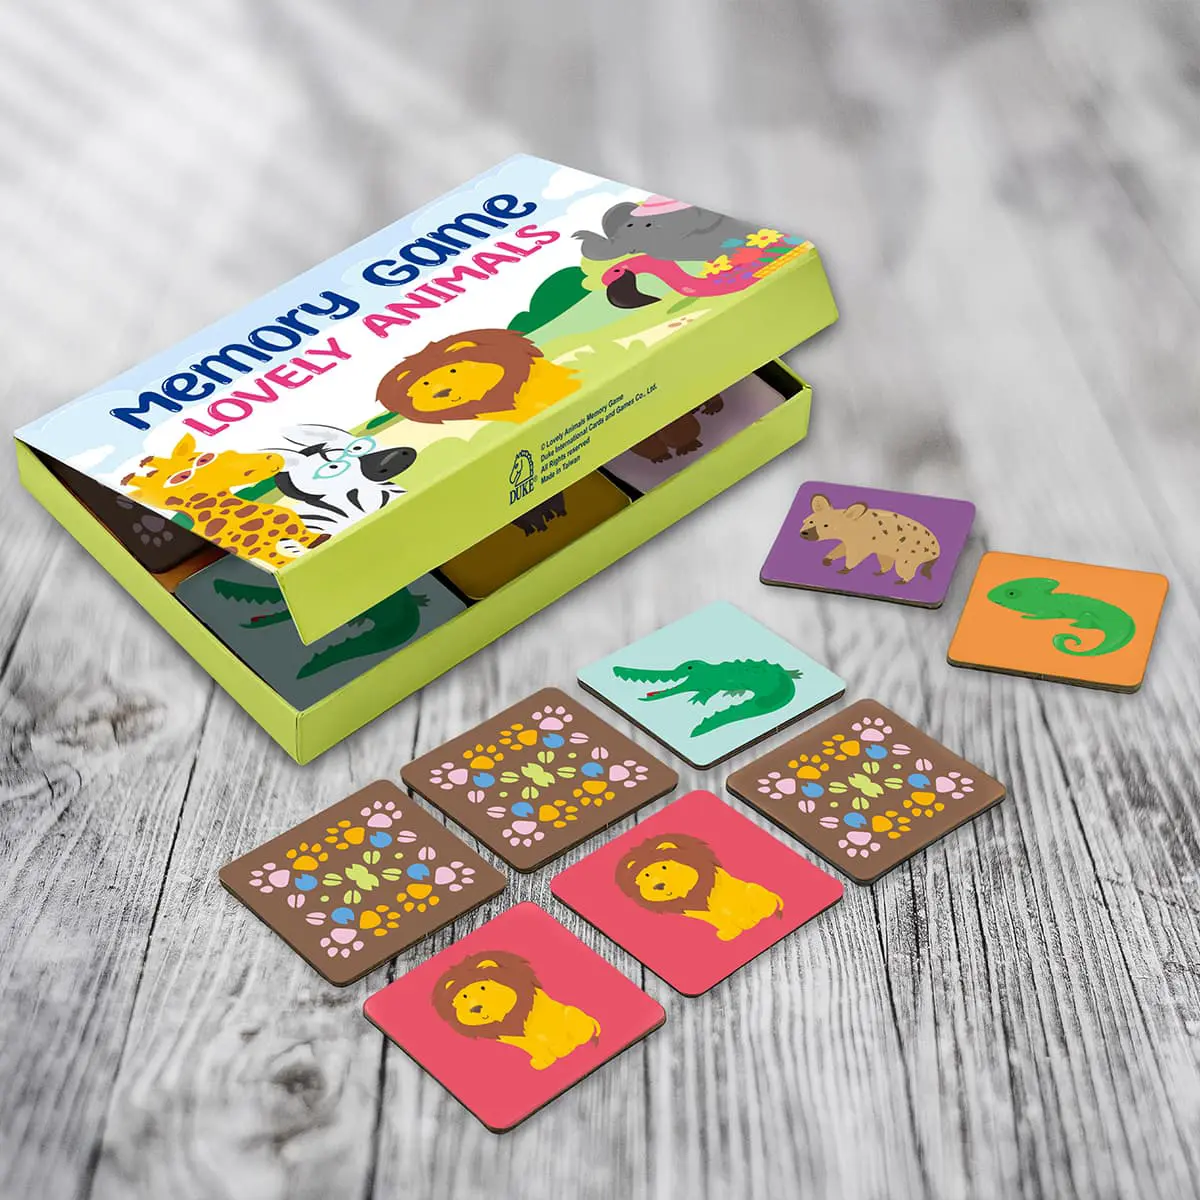 Lovely Animals Match Memory Game Set